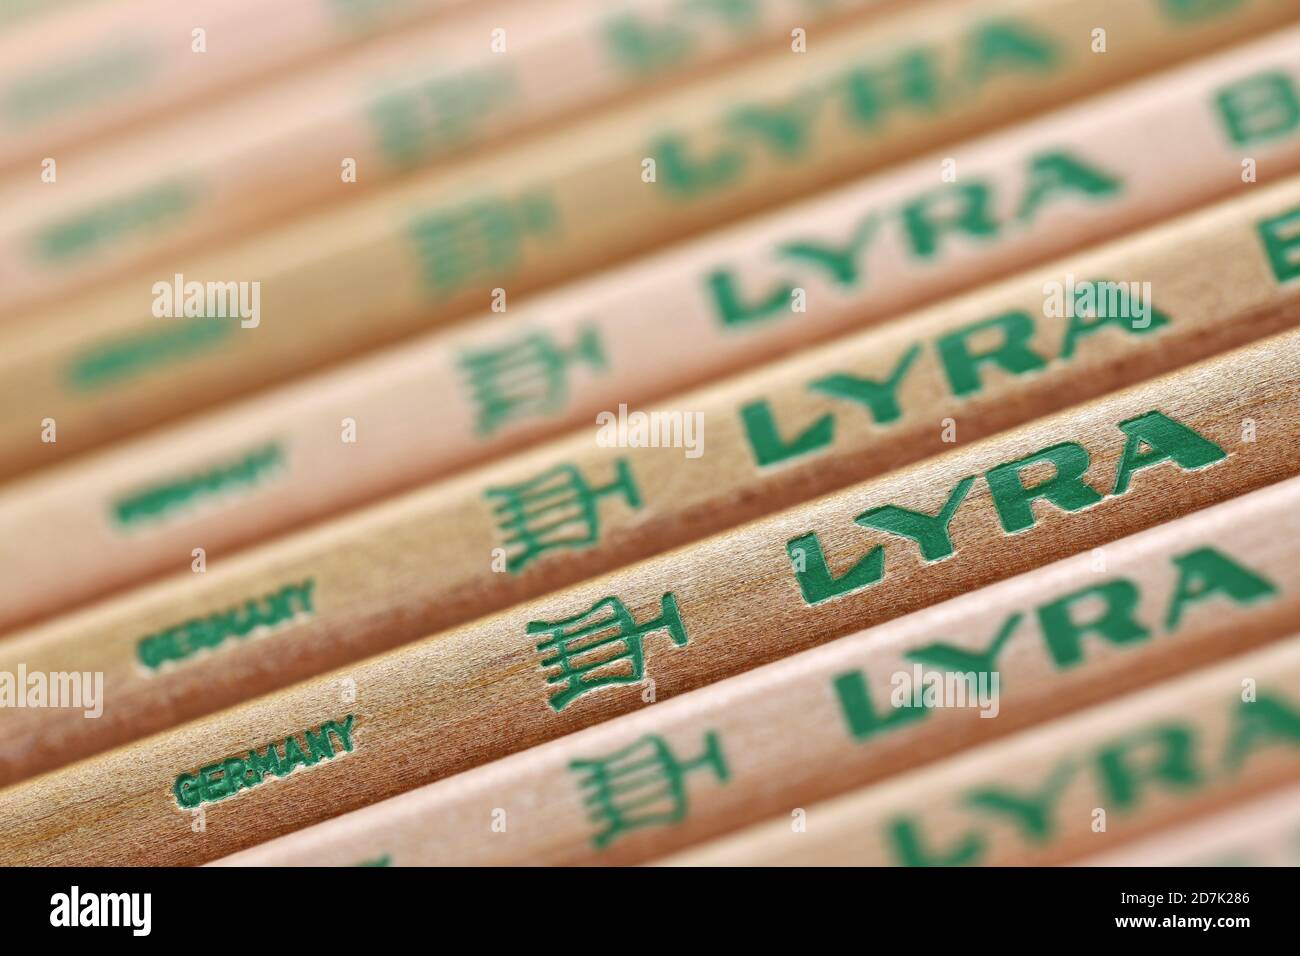 Lyra marking at pencils. Lyra is the oldest pencil factory in Nuremberg and has been part of the Italian FILA group since 2008. Stock Photo